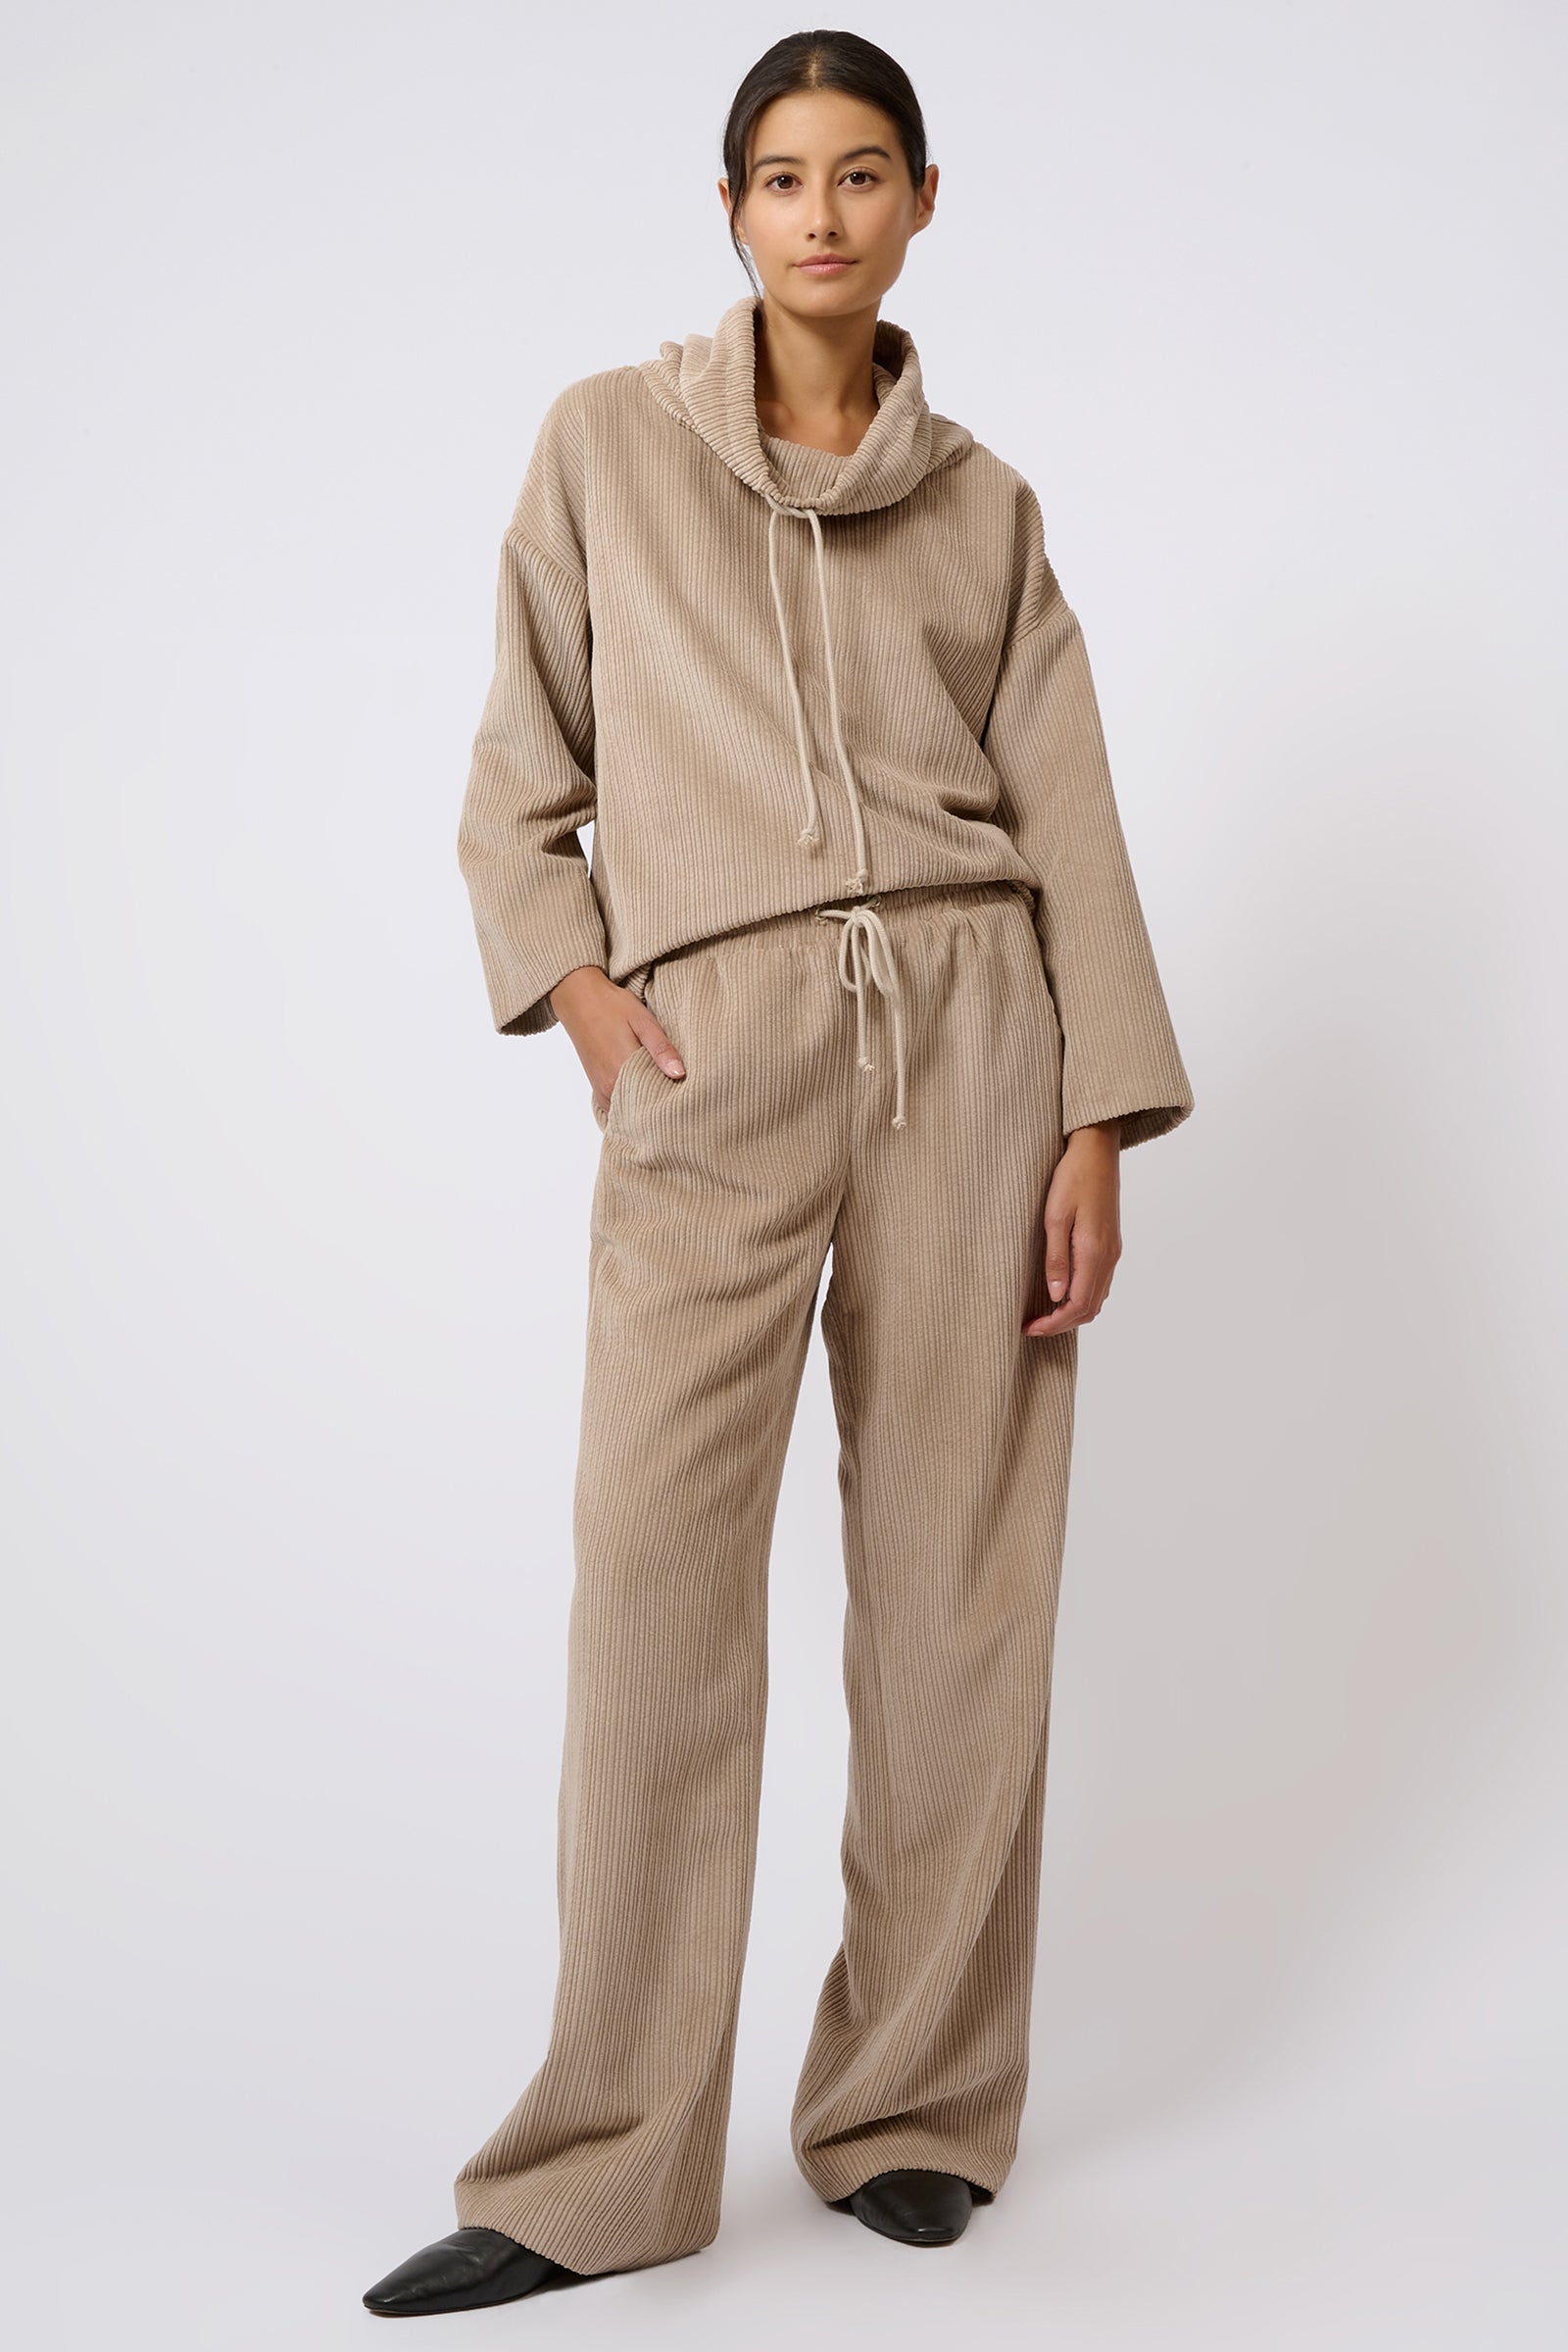 Kal Rieman Debbie Drawstring Pant in Beige on Model with Hand in Pocket Full Front View